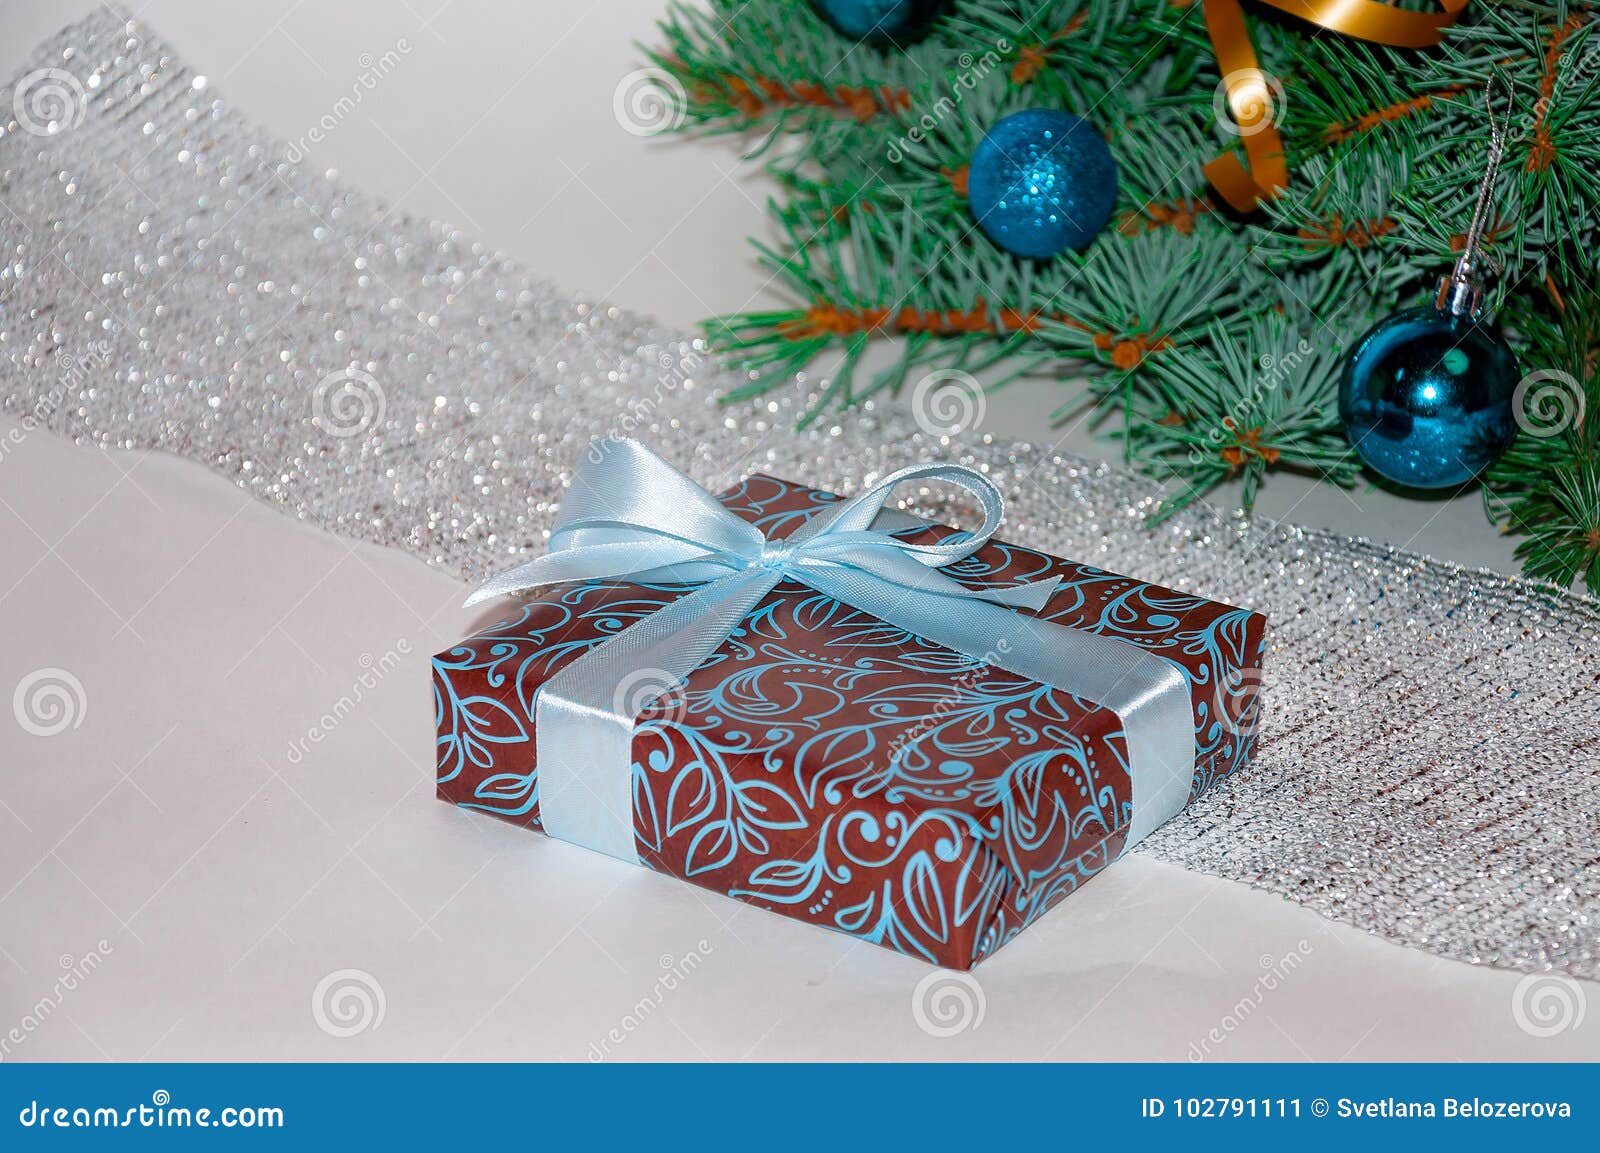 Christmas position Christmas t under the Christmas tree on a white background Christmas presents Blue toys on the Christmas tree and shiny